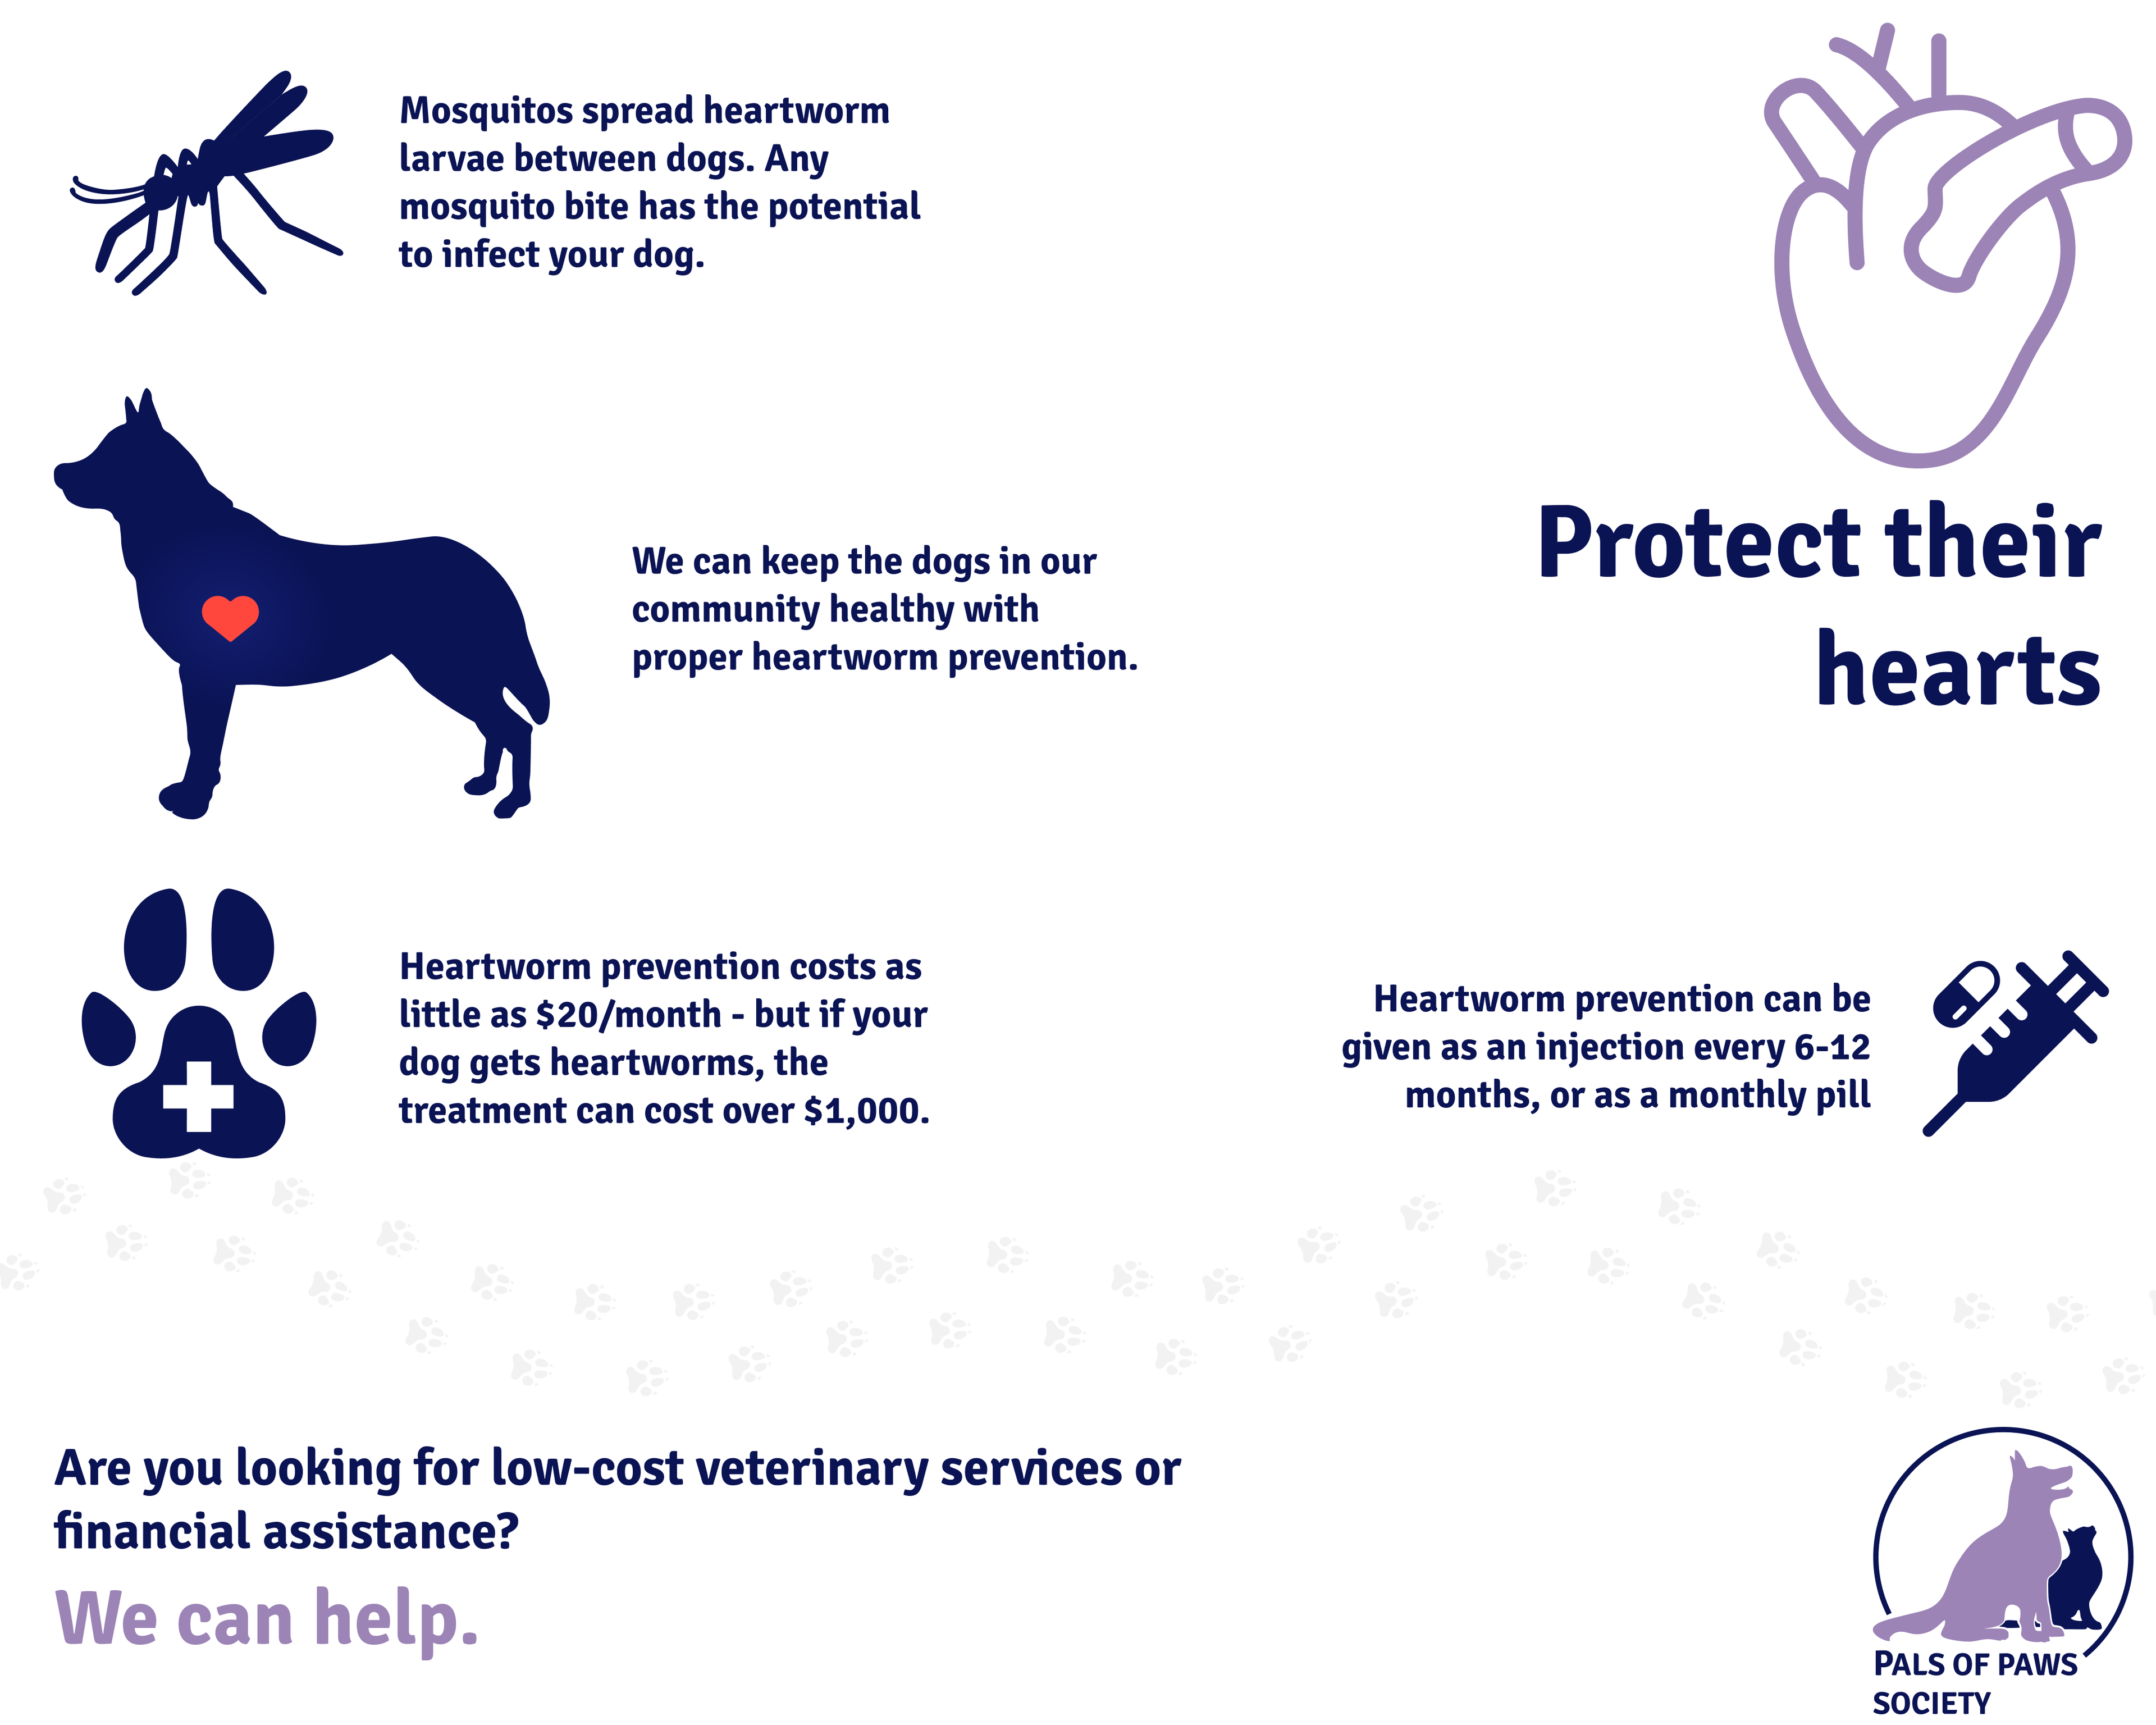 A series of infographics describing the importance of heartworm treatments as well as the negative effects a growing stray population has on heartworm infection rates